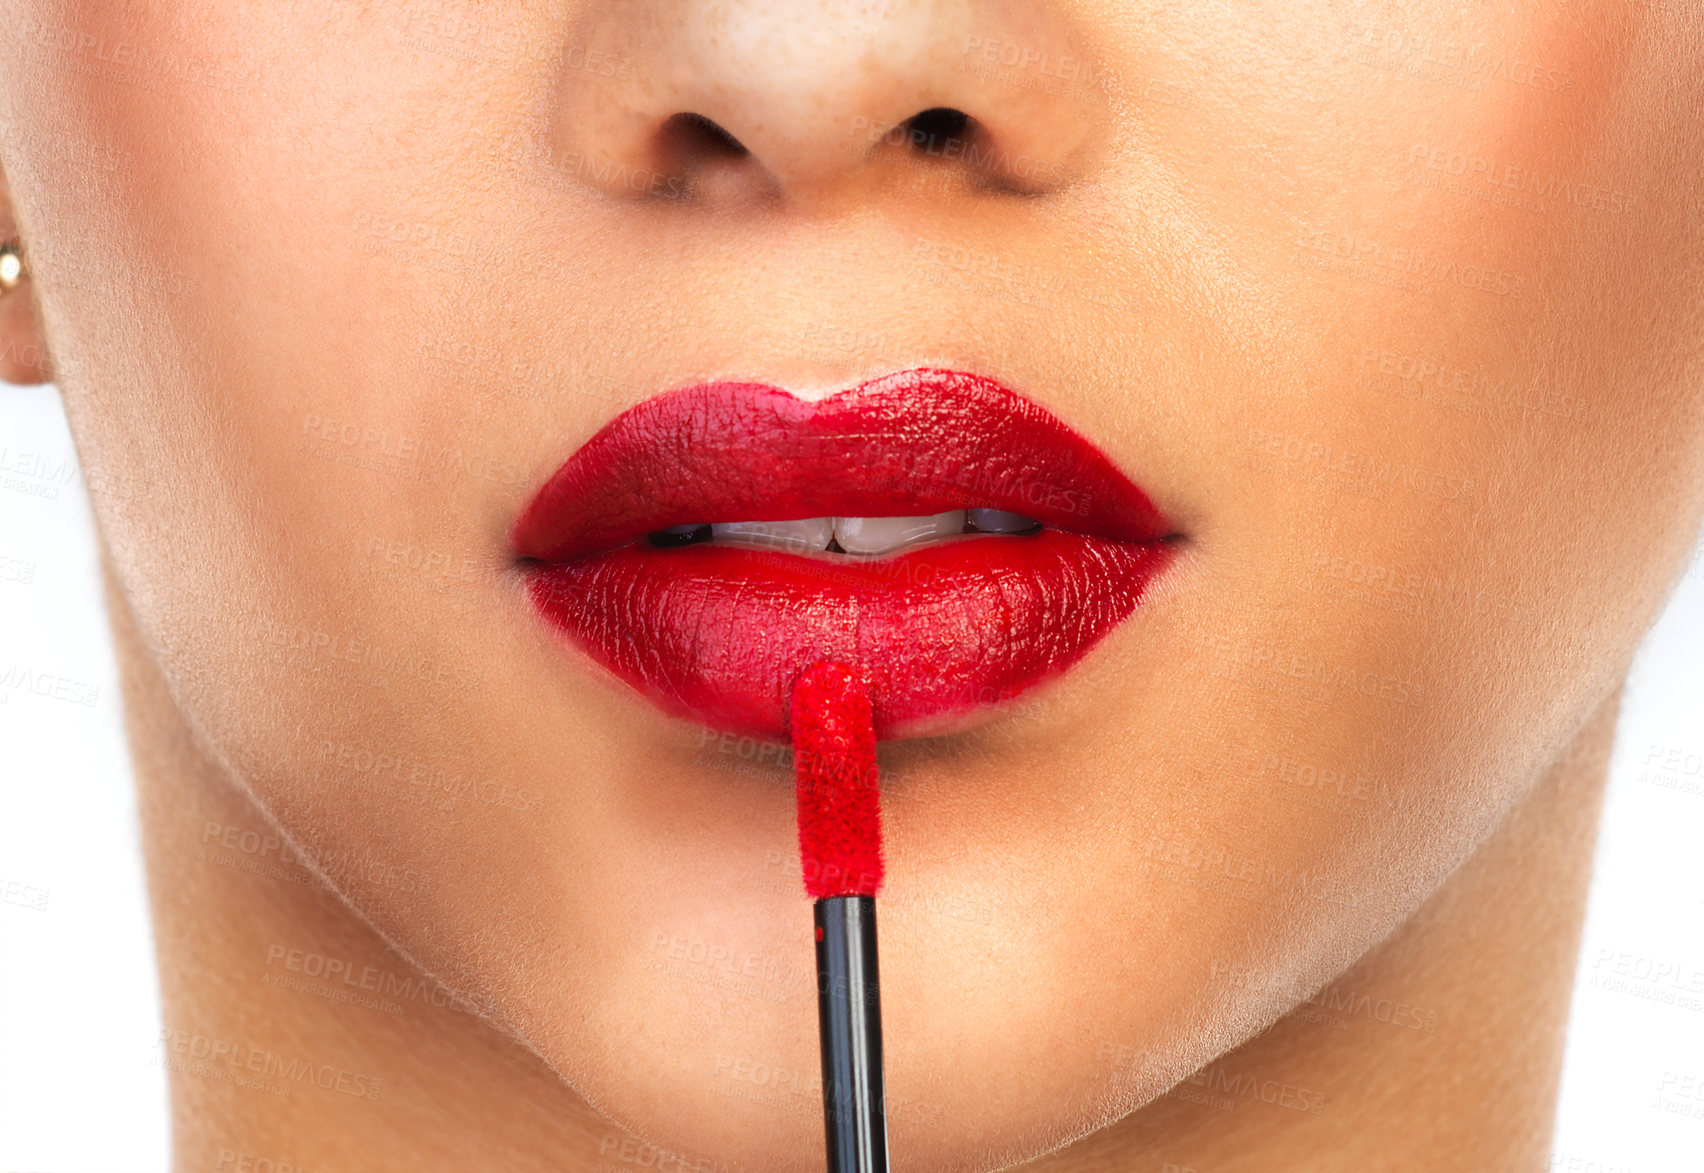 Buy stock photo Cropped shot of an unrecognizable woman applying red lipstick to her lips